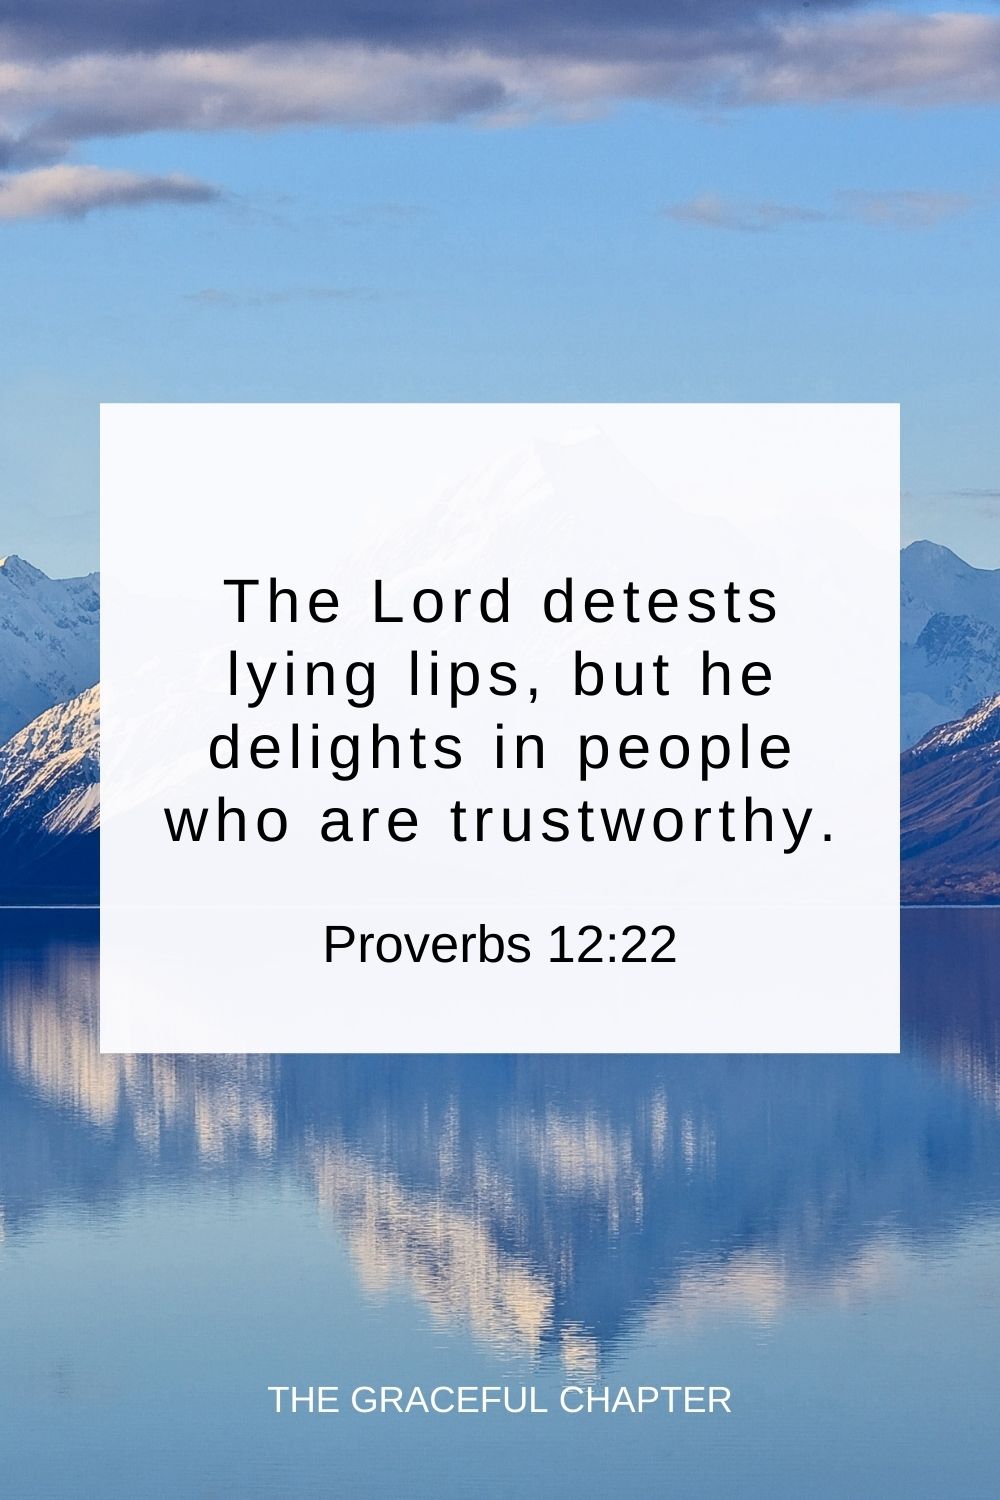 The Lord detests lying lips, but he delights in people who are trustworthy. Proverbs 12:22